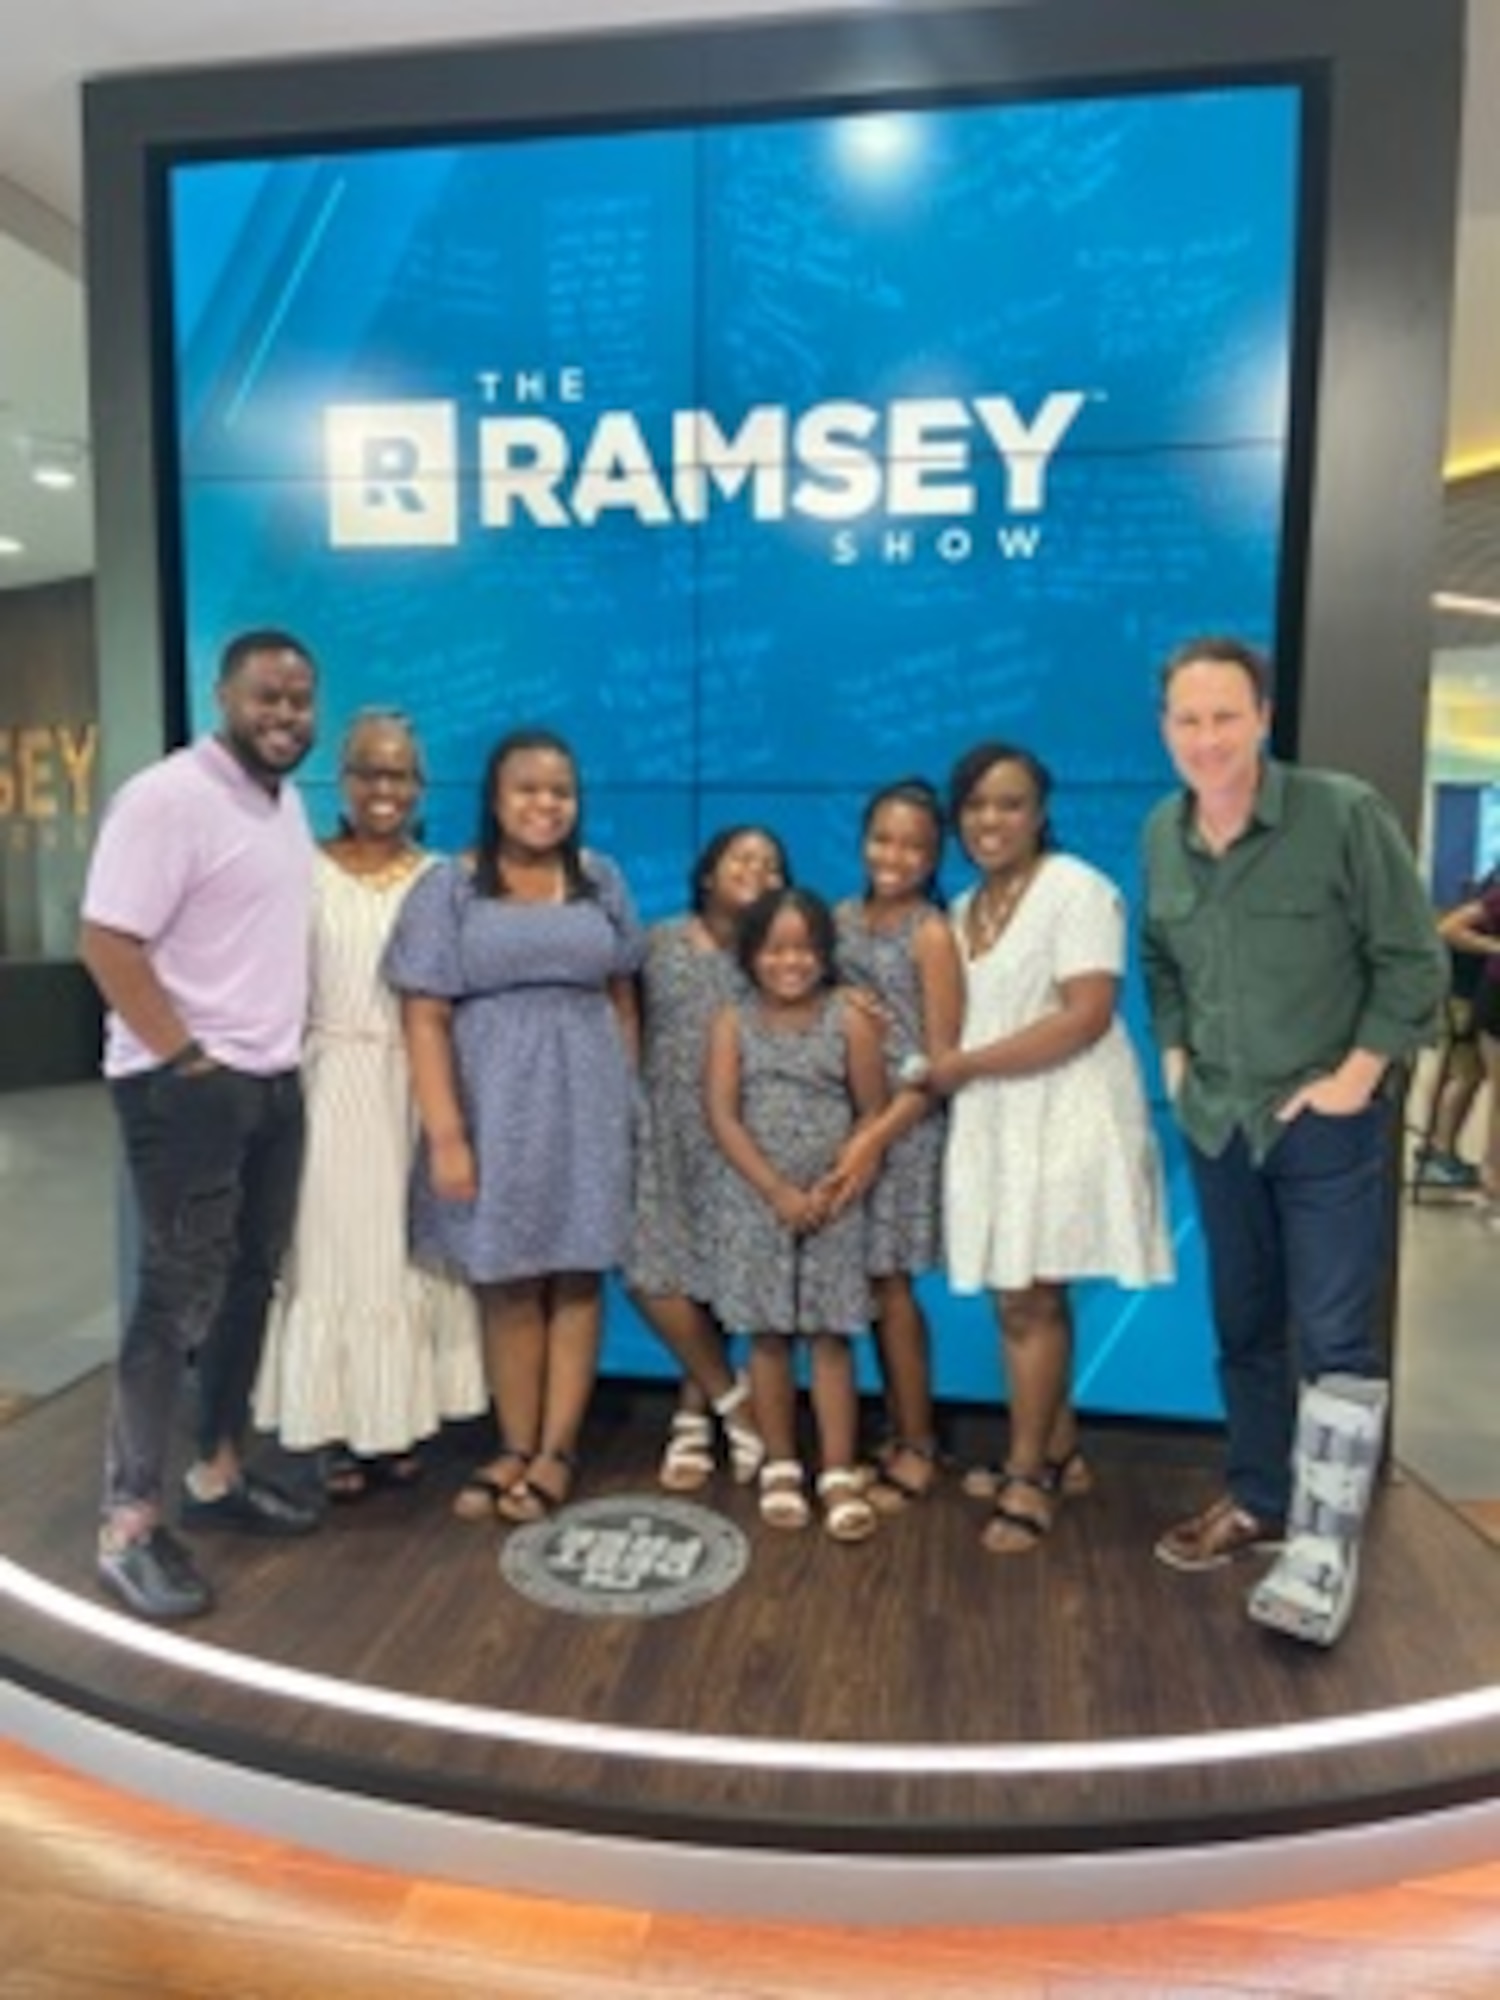 U.S. Air Force Master Sgt. Traci Coston stands next to her family and the hosts of The Ramsey Show on The Ramsey Show set, May 28, 2021. Coston appeared on the show to explain how she paid off $36,000 in student loan and credit card debt in 14 months. She currently serves as the 9th Air Force (Air Forces Central)/Financial Management superintendent and also holds a financial coaching master’s certification in personal finance to help others achieve their financial dreams.